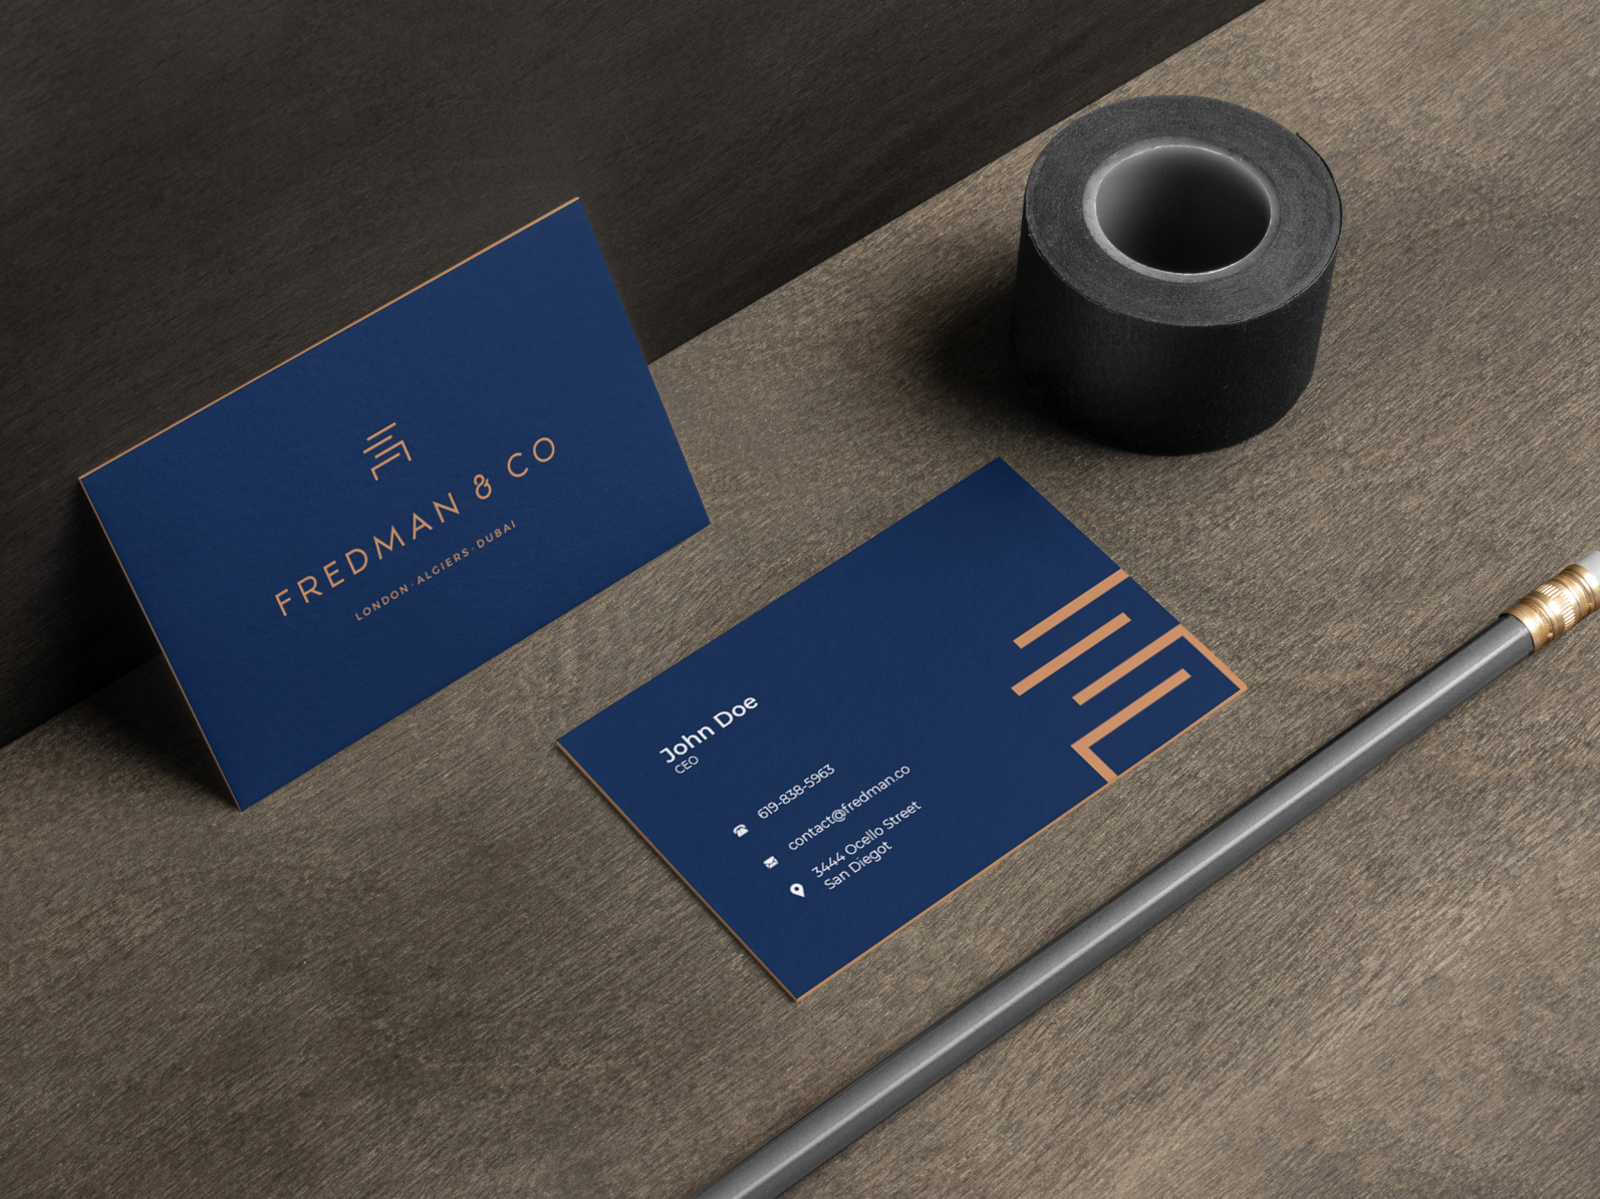 Download Stationery Branding Mockup by Mockup Cloud on Dribbble